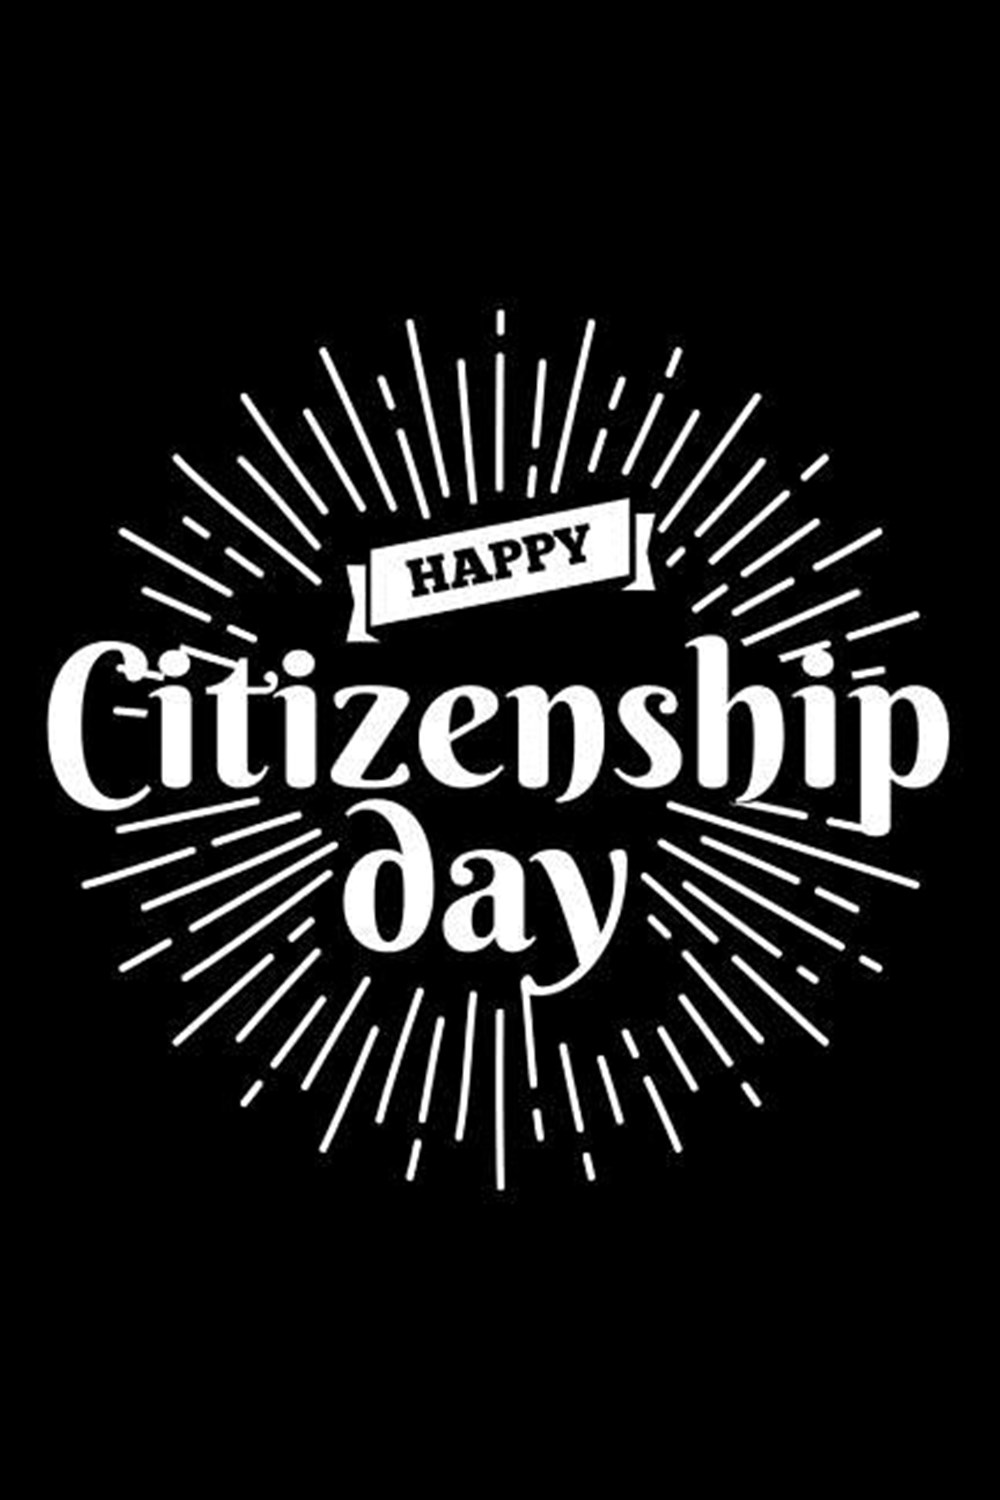 Happy Citizenship Day Blank Paper Sketch Book - Artist Sketch Pad Journal for Sketching, Doodling, D